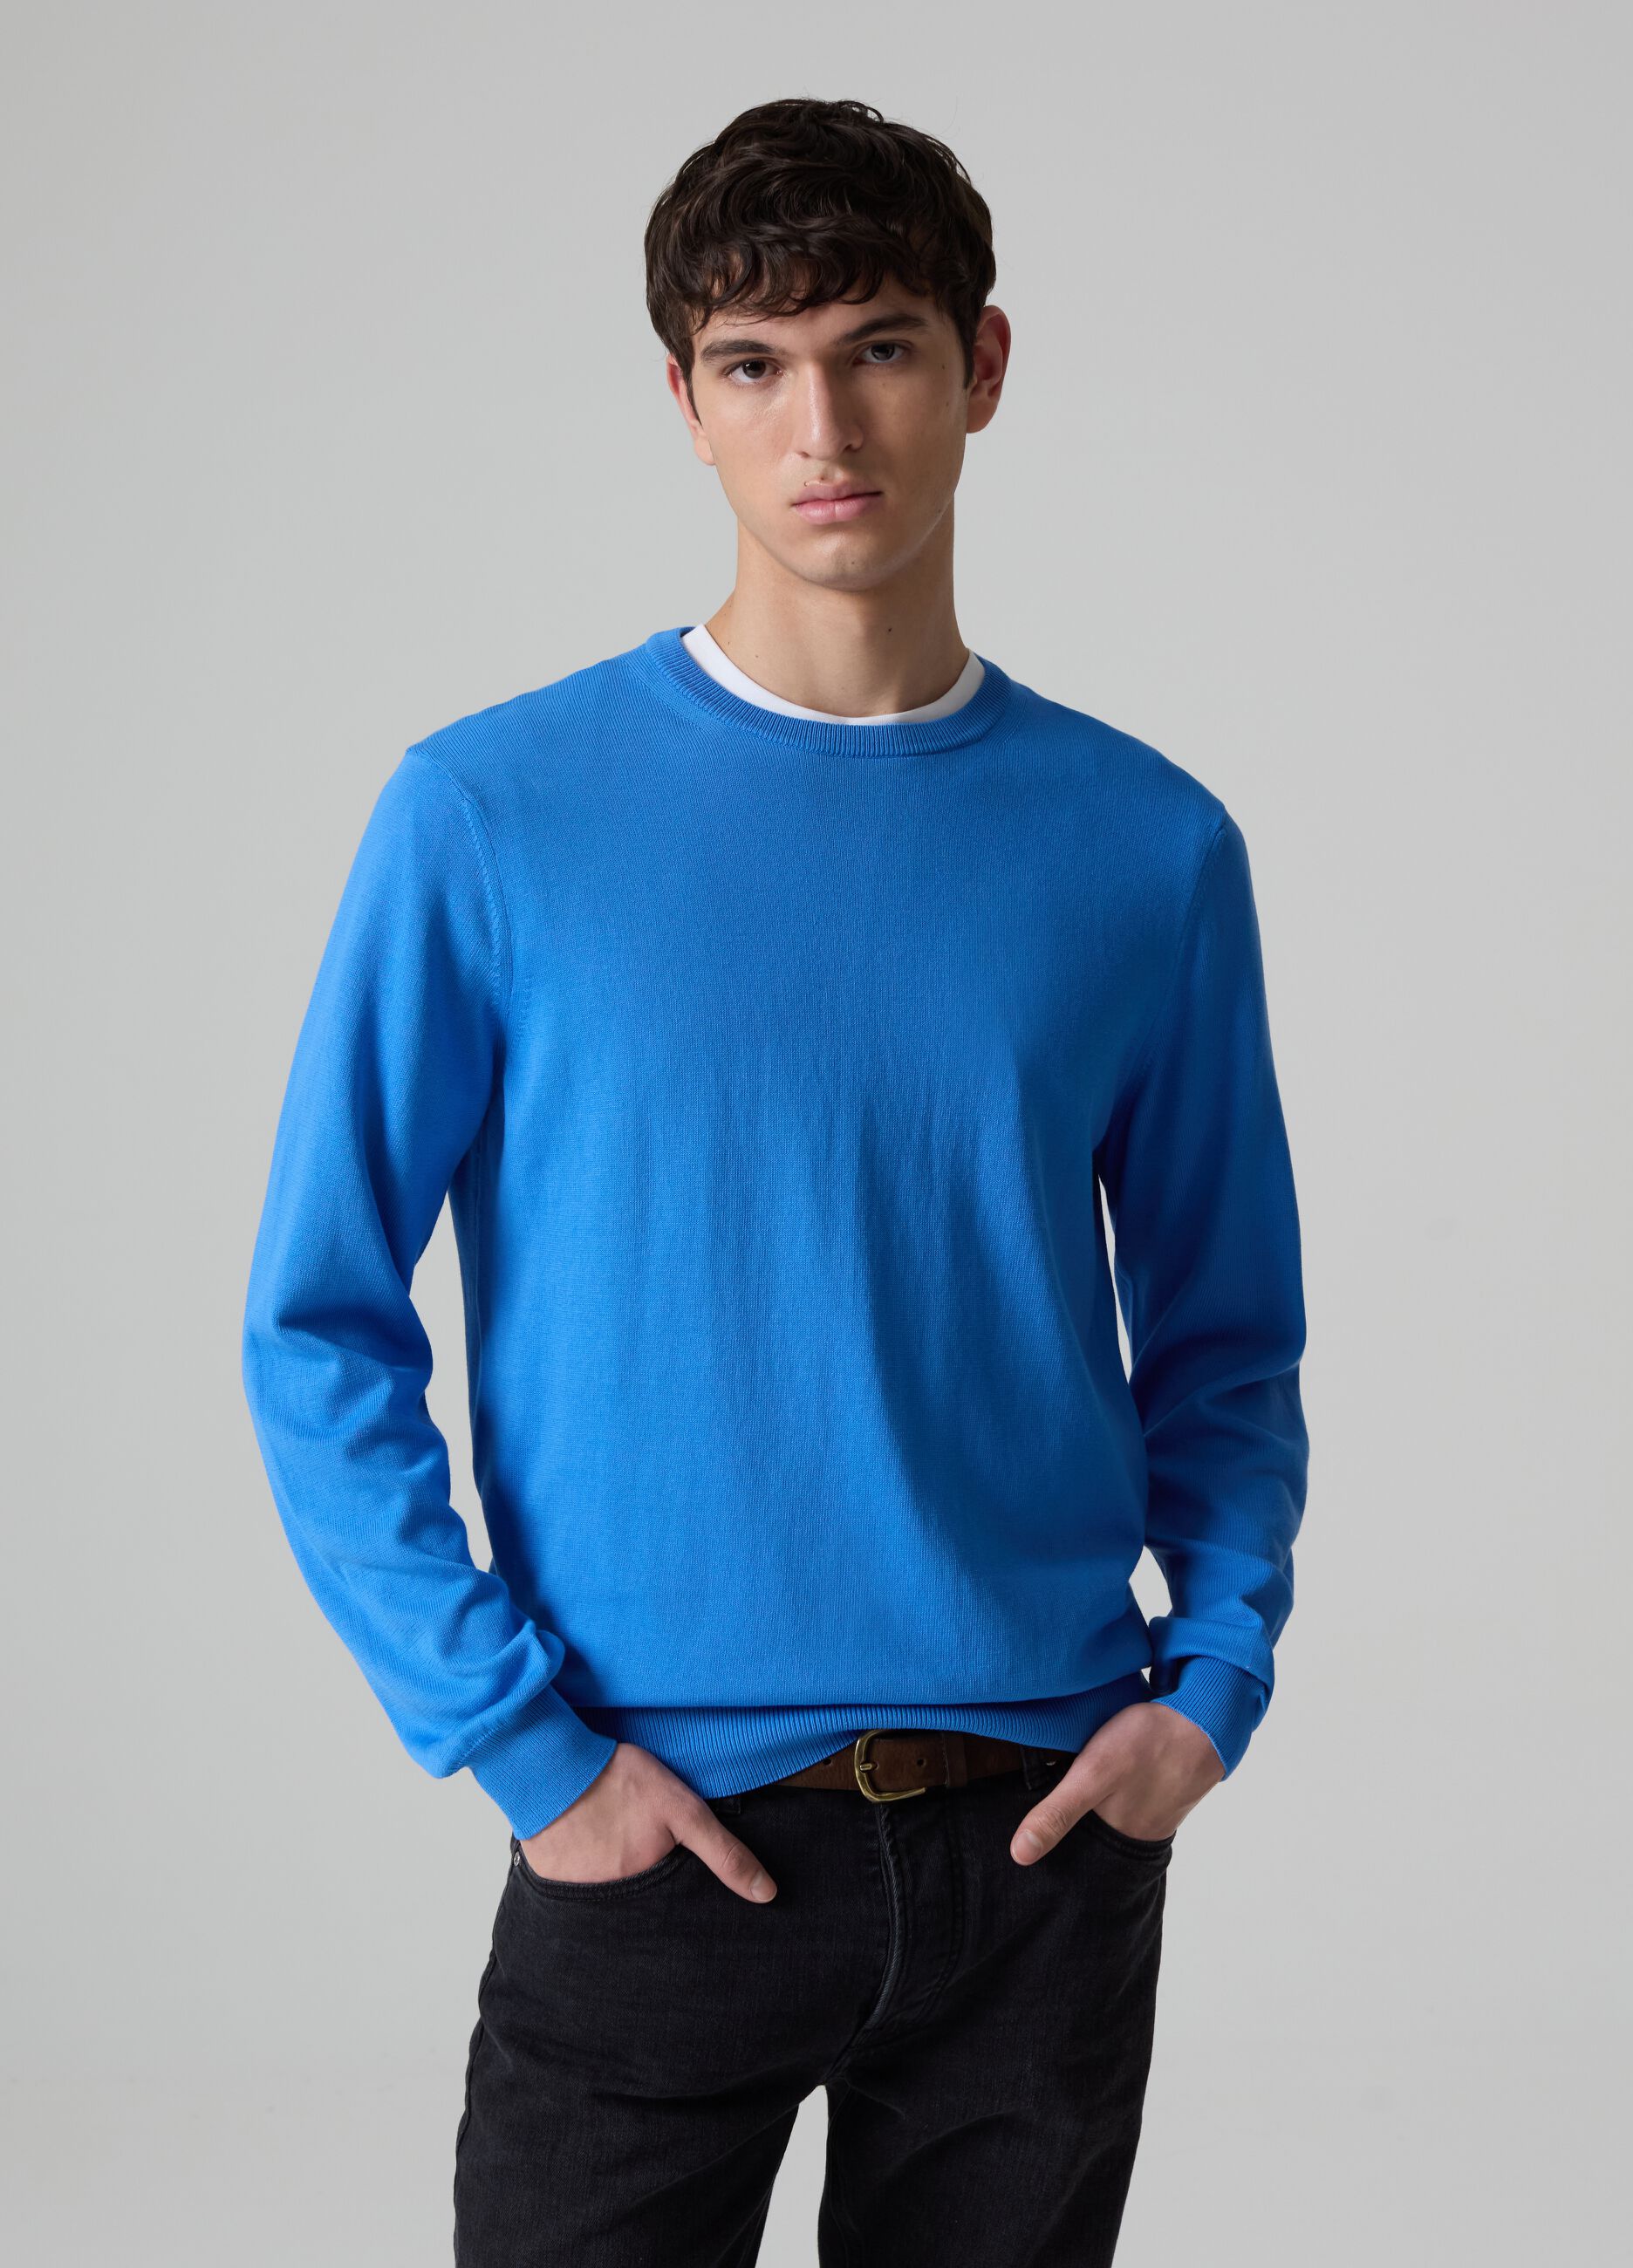 Cotton pullover with round neck